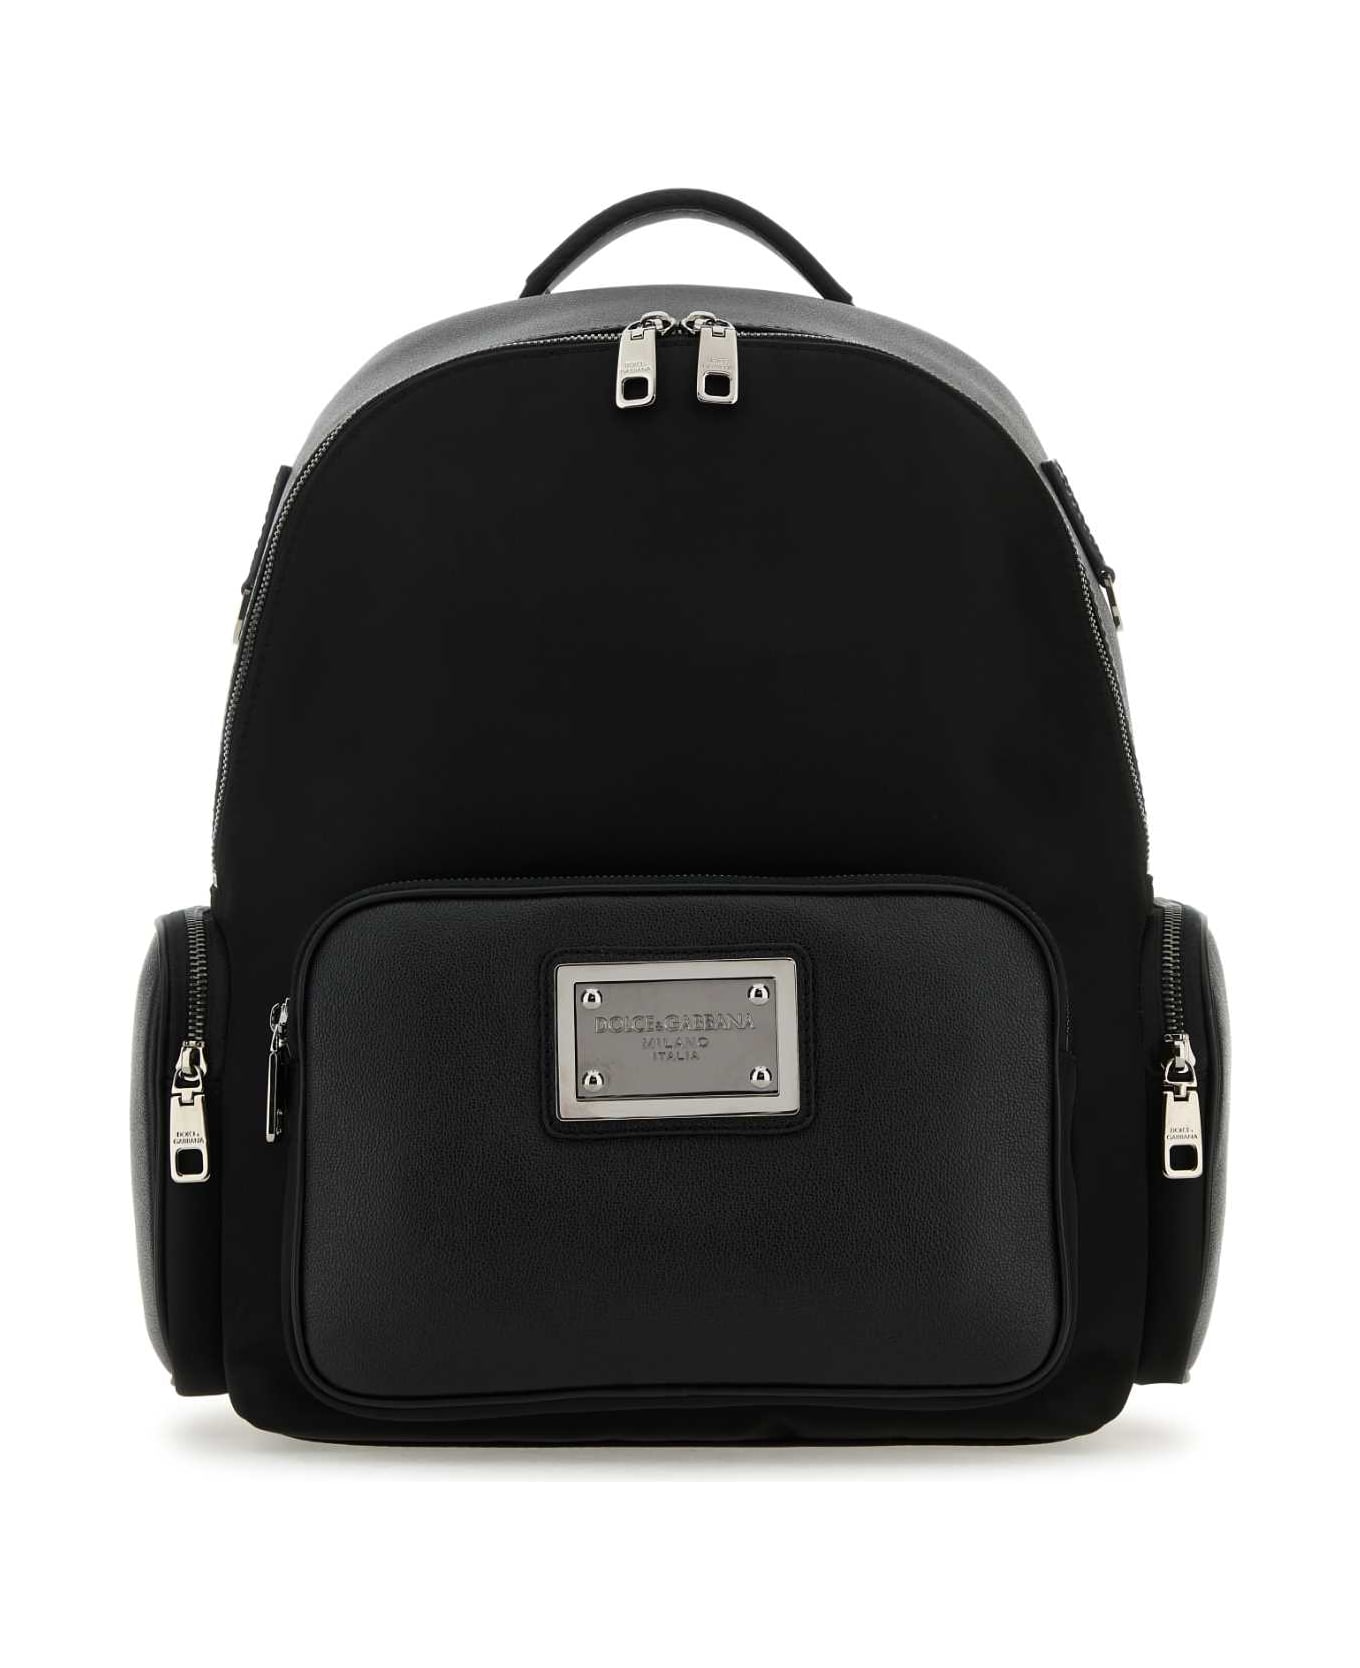 Dolce & Gabbana Black Fabric And Leather Backpack - 8B956